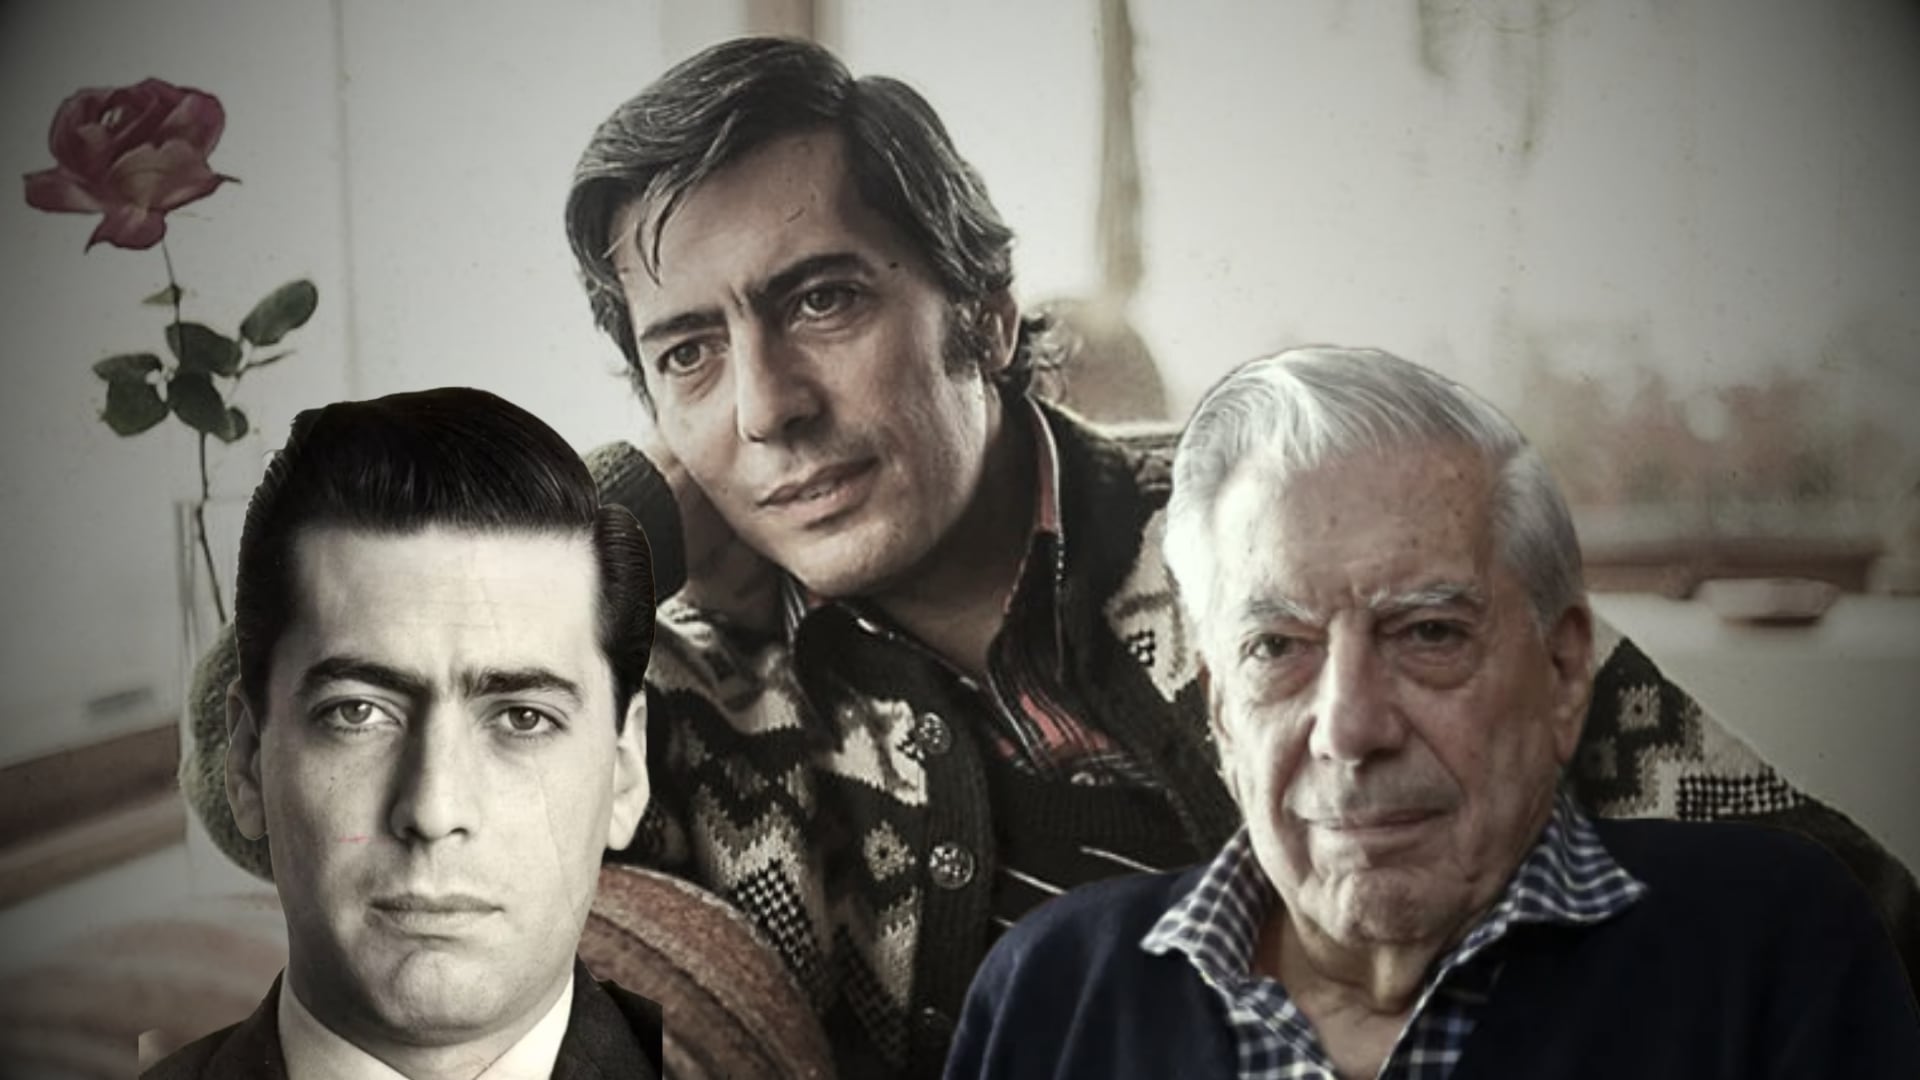 In 2020, Vargas Llosa said that the function of the writer is to criticize the established powers. 